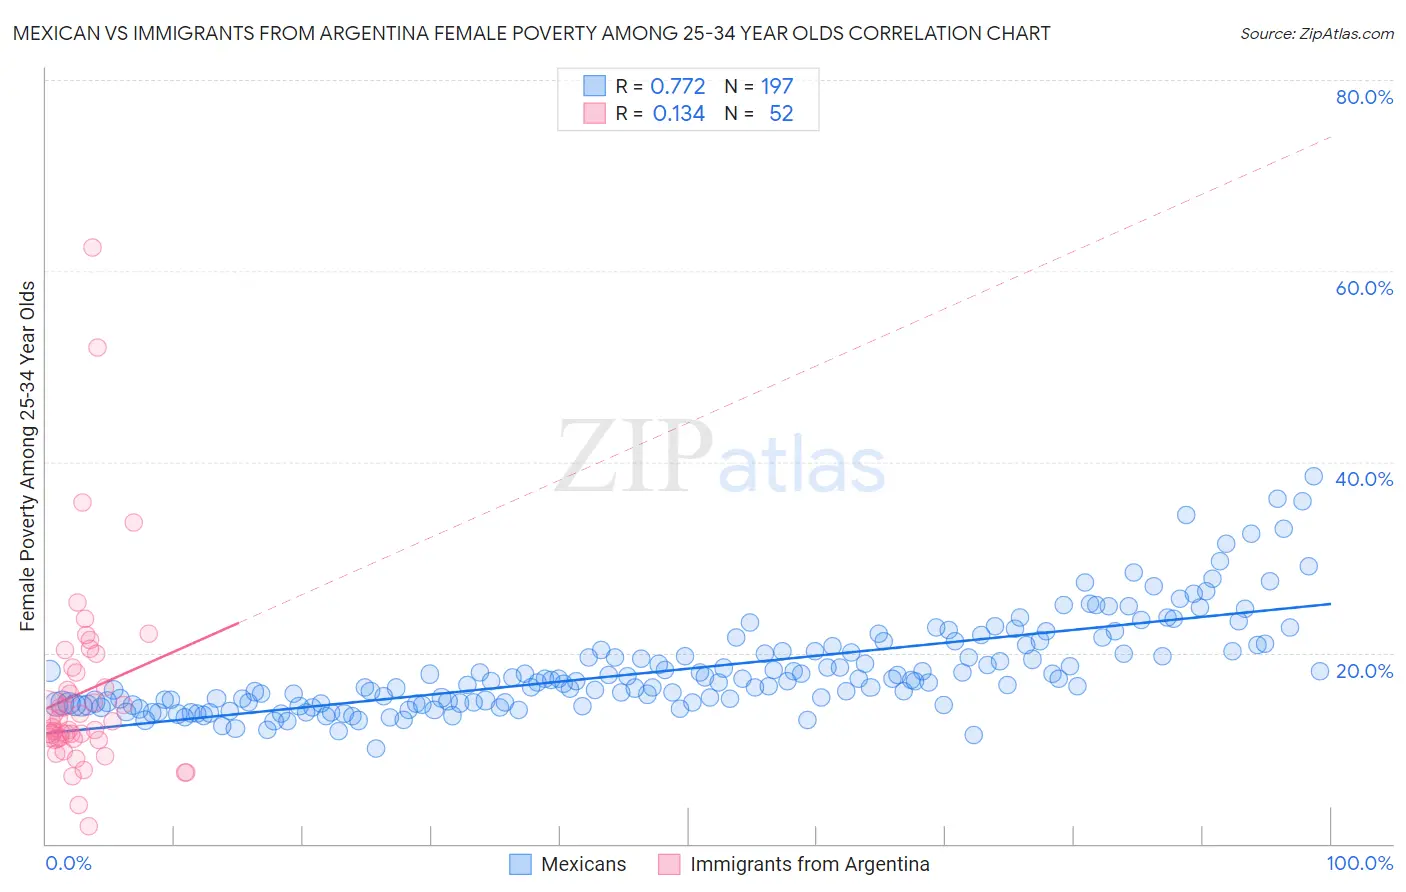 Mexican vs Immigrants from Argentina Female Poverty Among 25-34 Year Olds